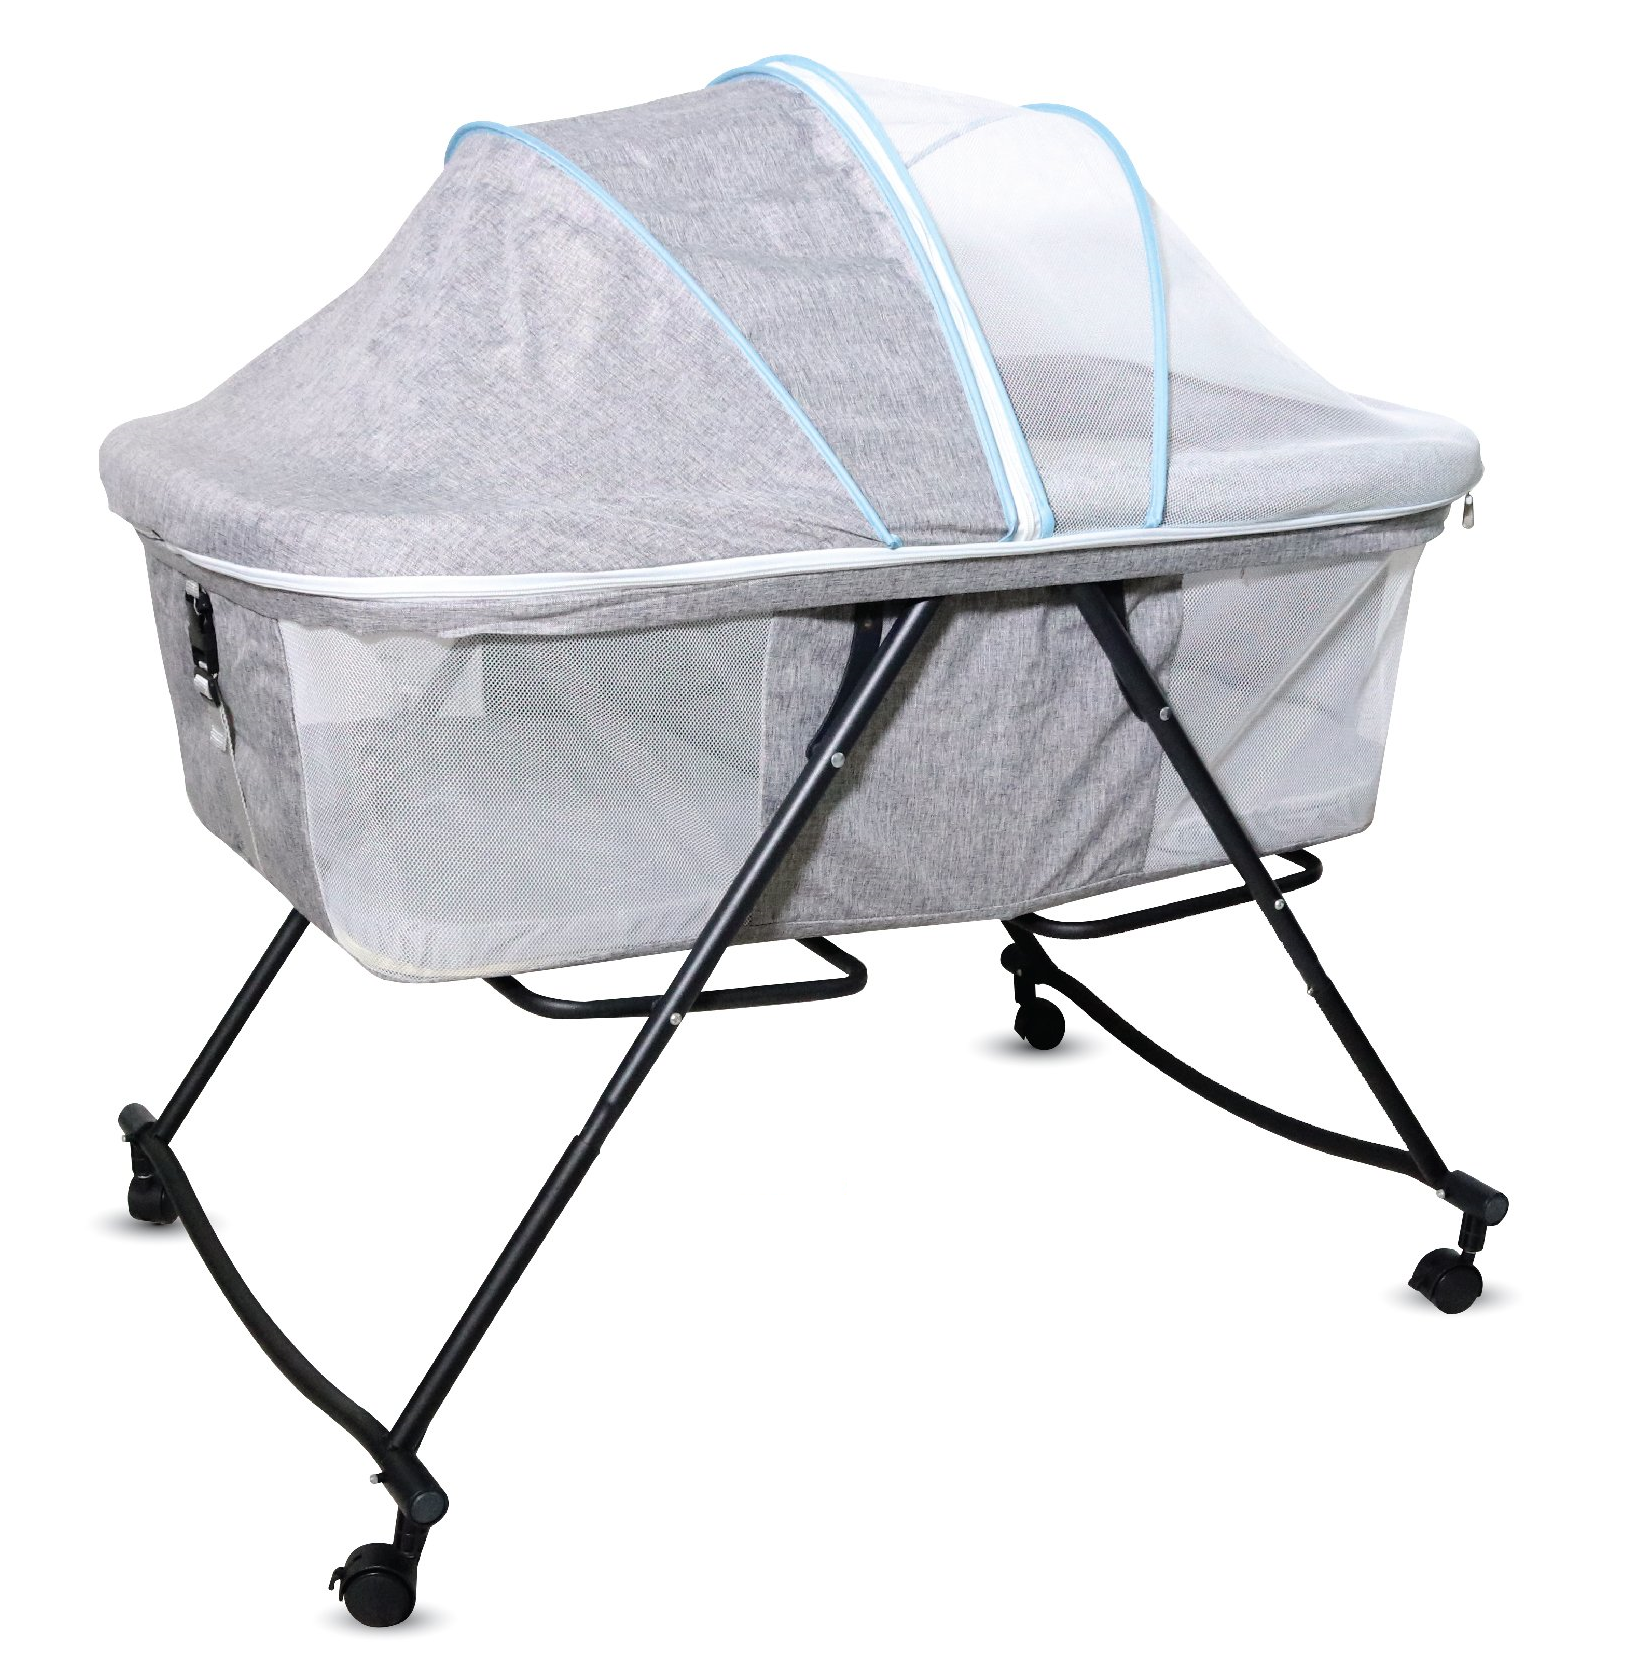 Multi function & portable playpen for infant baby folding cradle and swing (BAY0017GY)